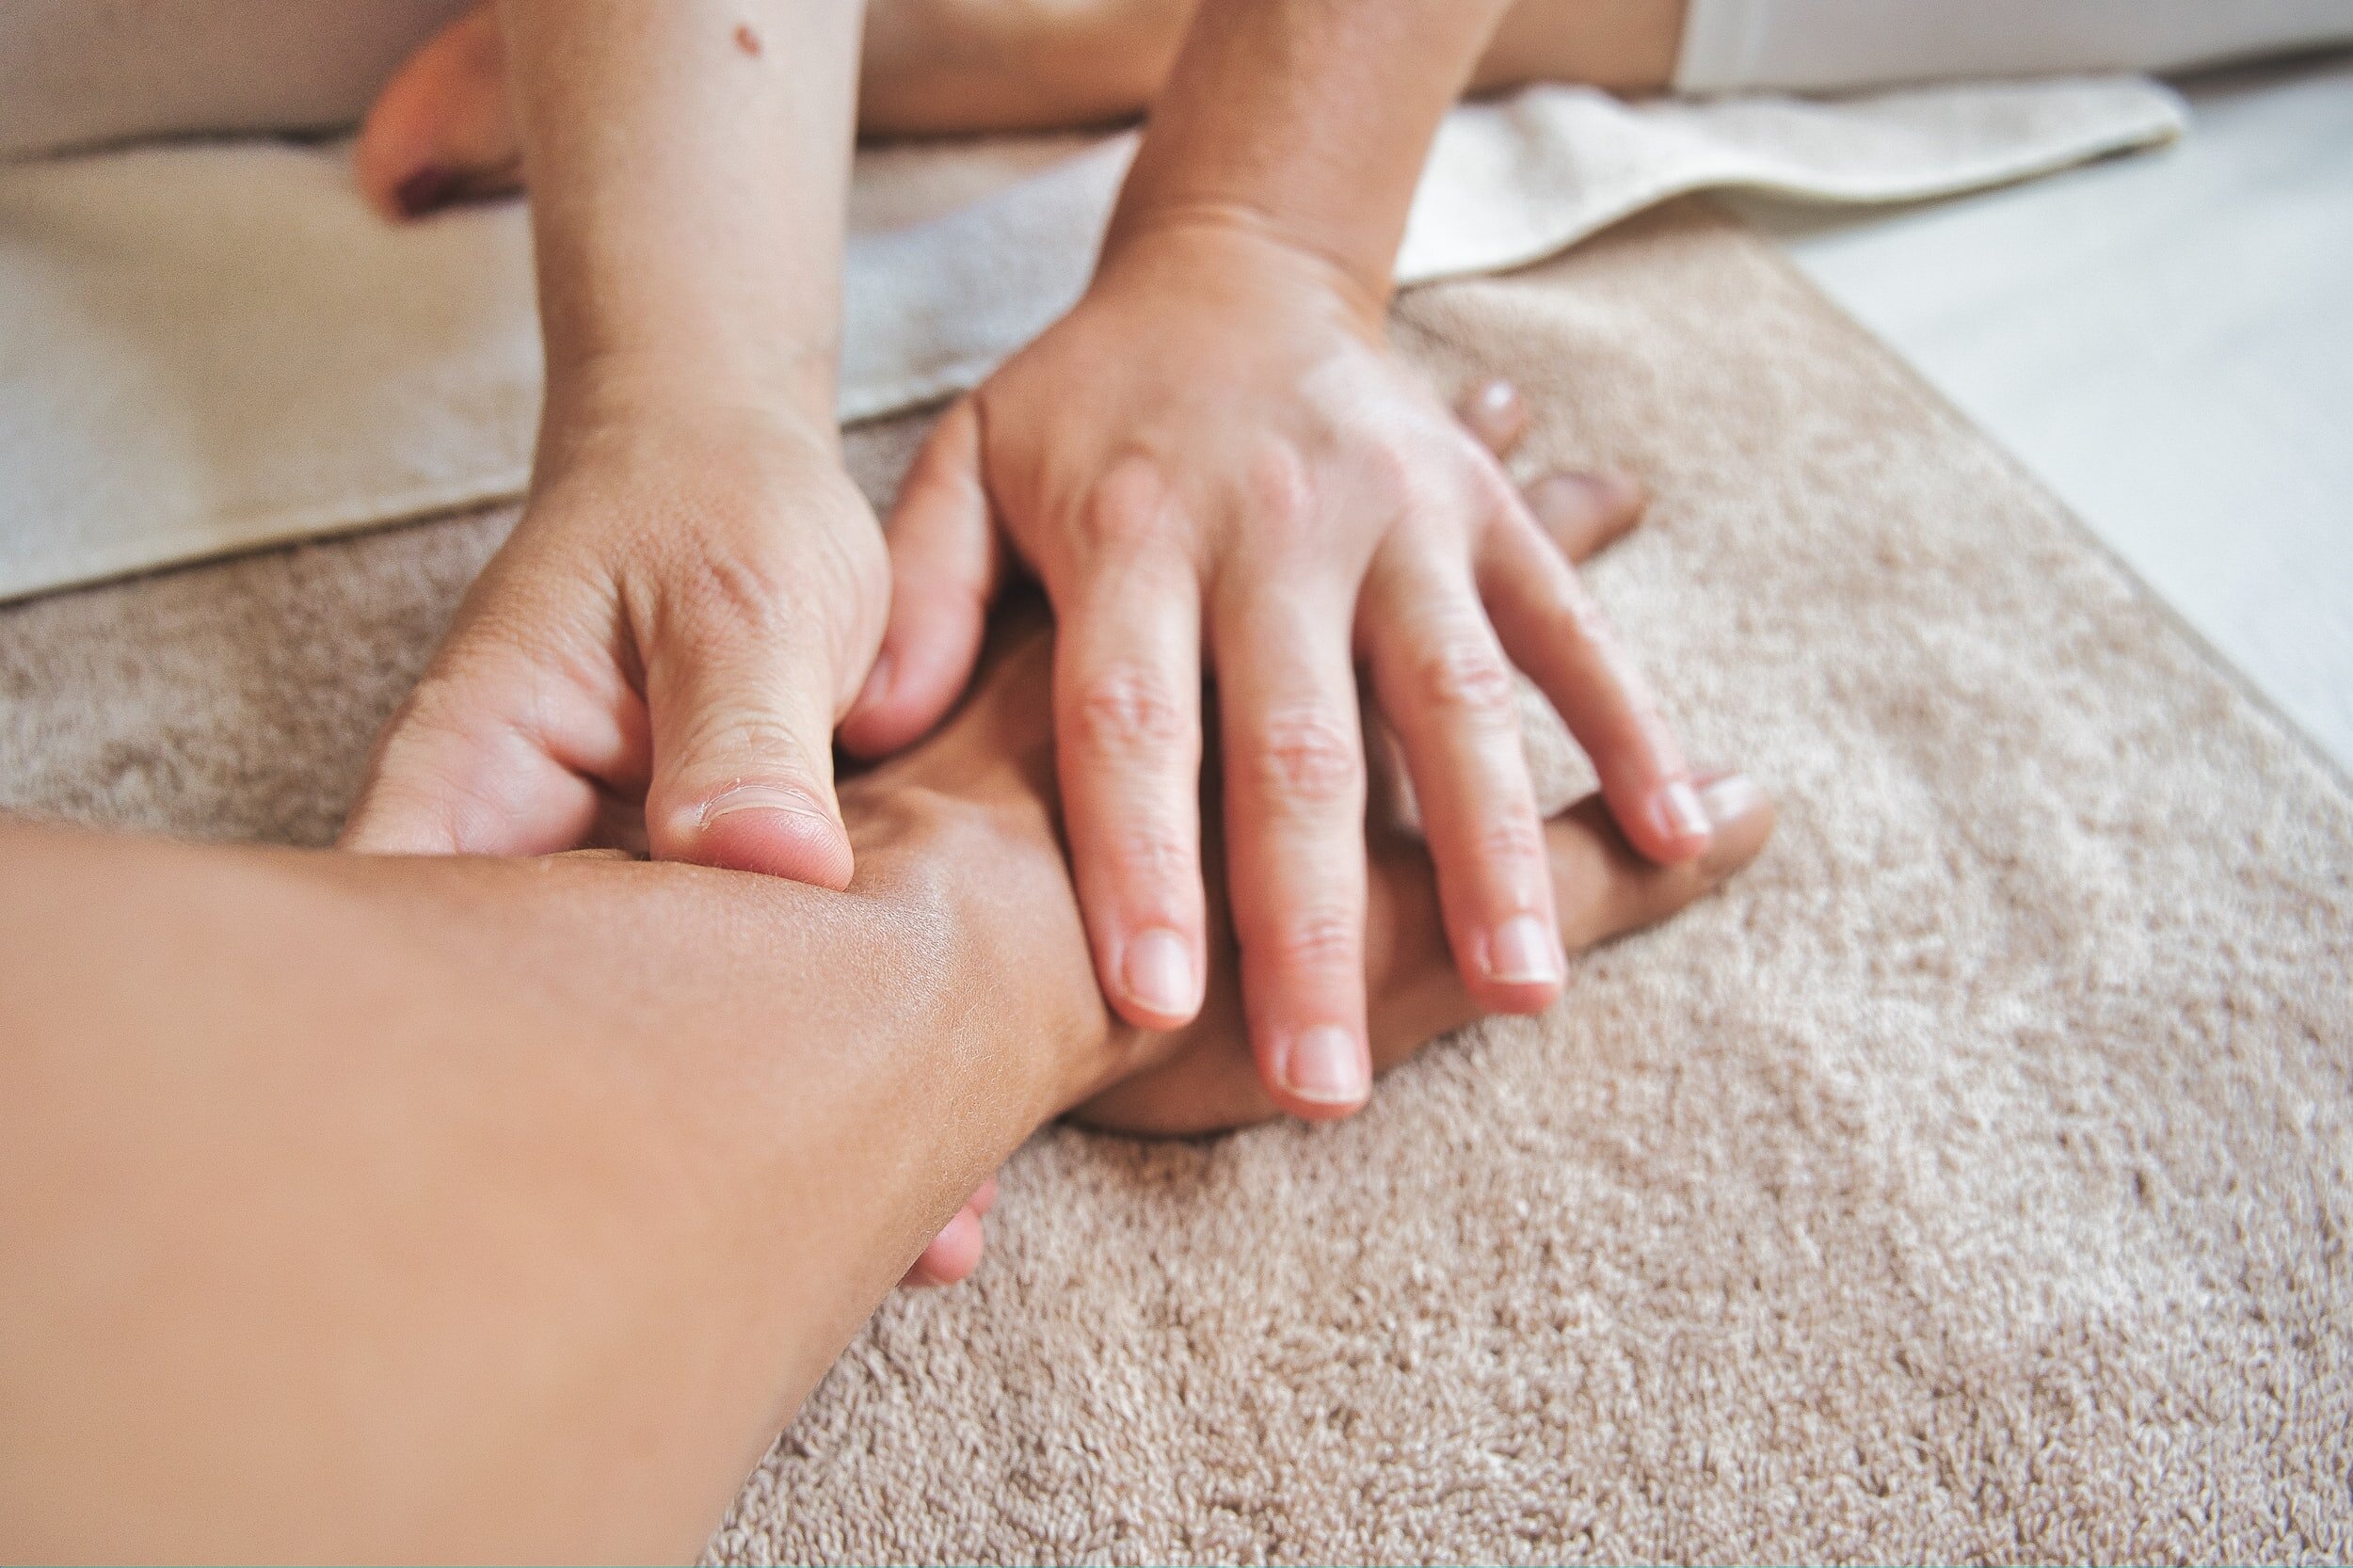 A pair of hands massages another' person’s arm, indicating they have tendonitis or carpal tunnel